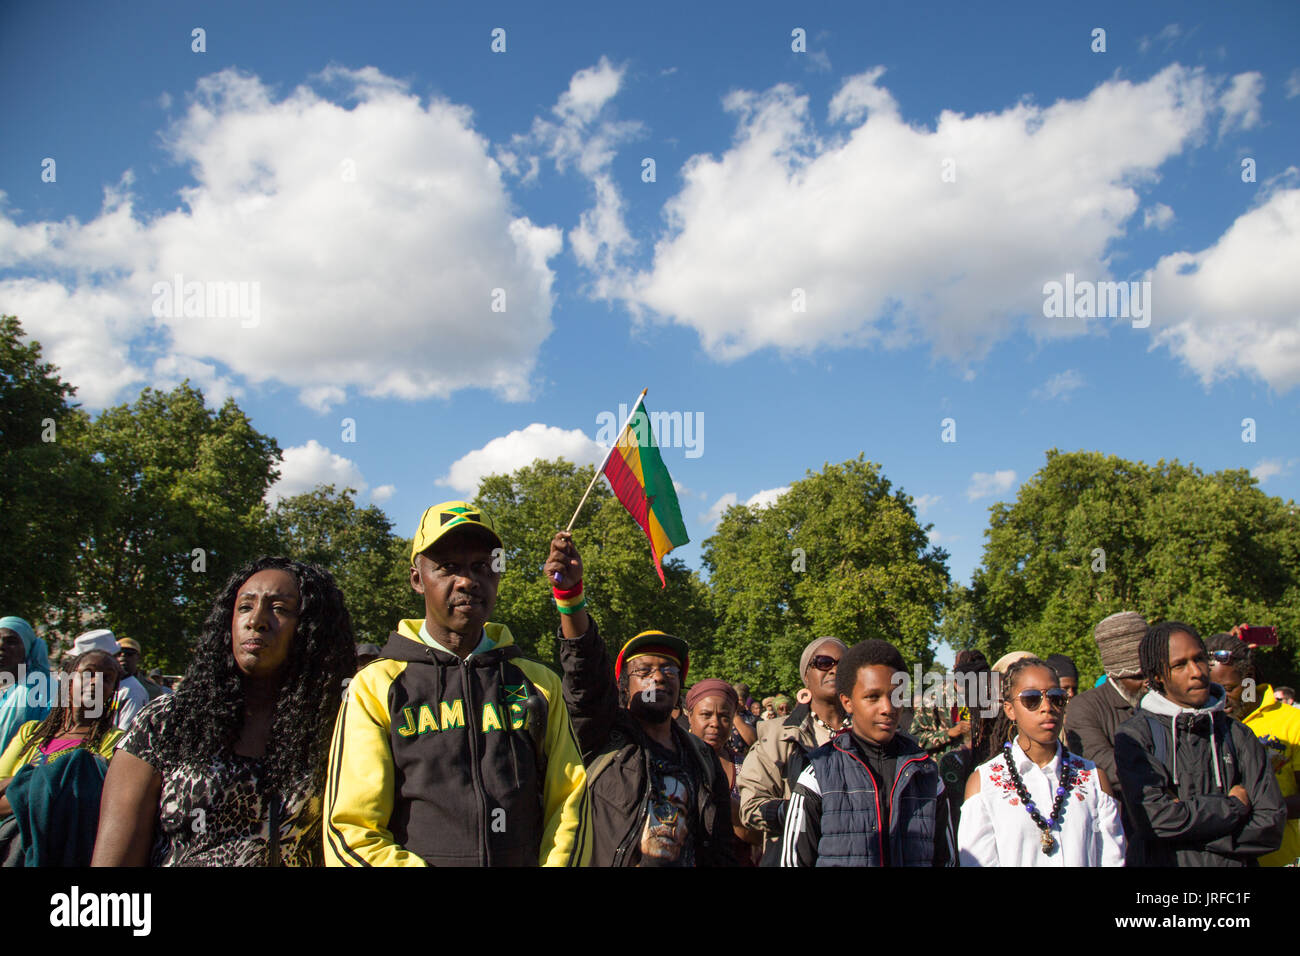 London UK 5th August 2017  People listen to a speaker during  Africa international day of action in Kennington Park South London .The nation of Islam were prevented from addressing the  audience  under the strict terms of the licence from Lambeth council. Credit: Thabo Jaiyesimi/Alamy Live News Stock Photo